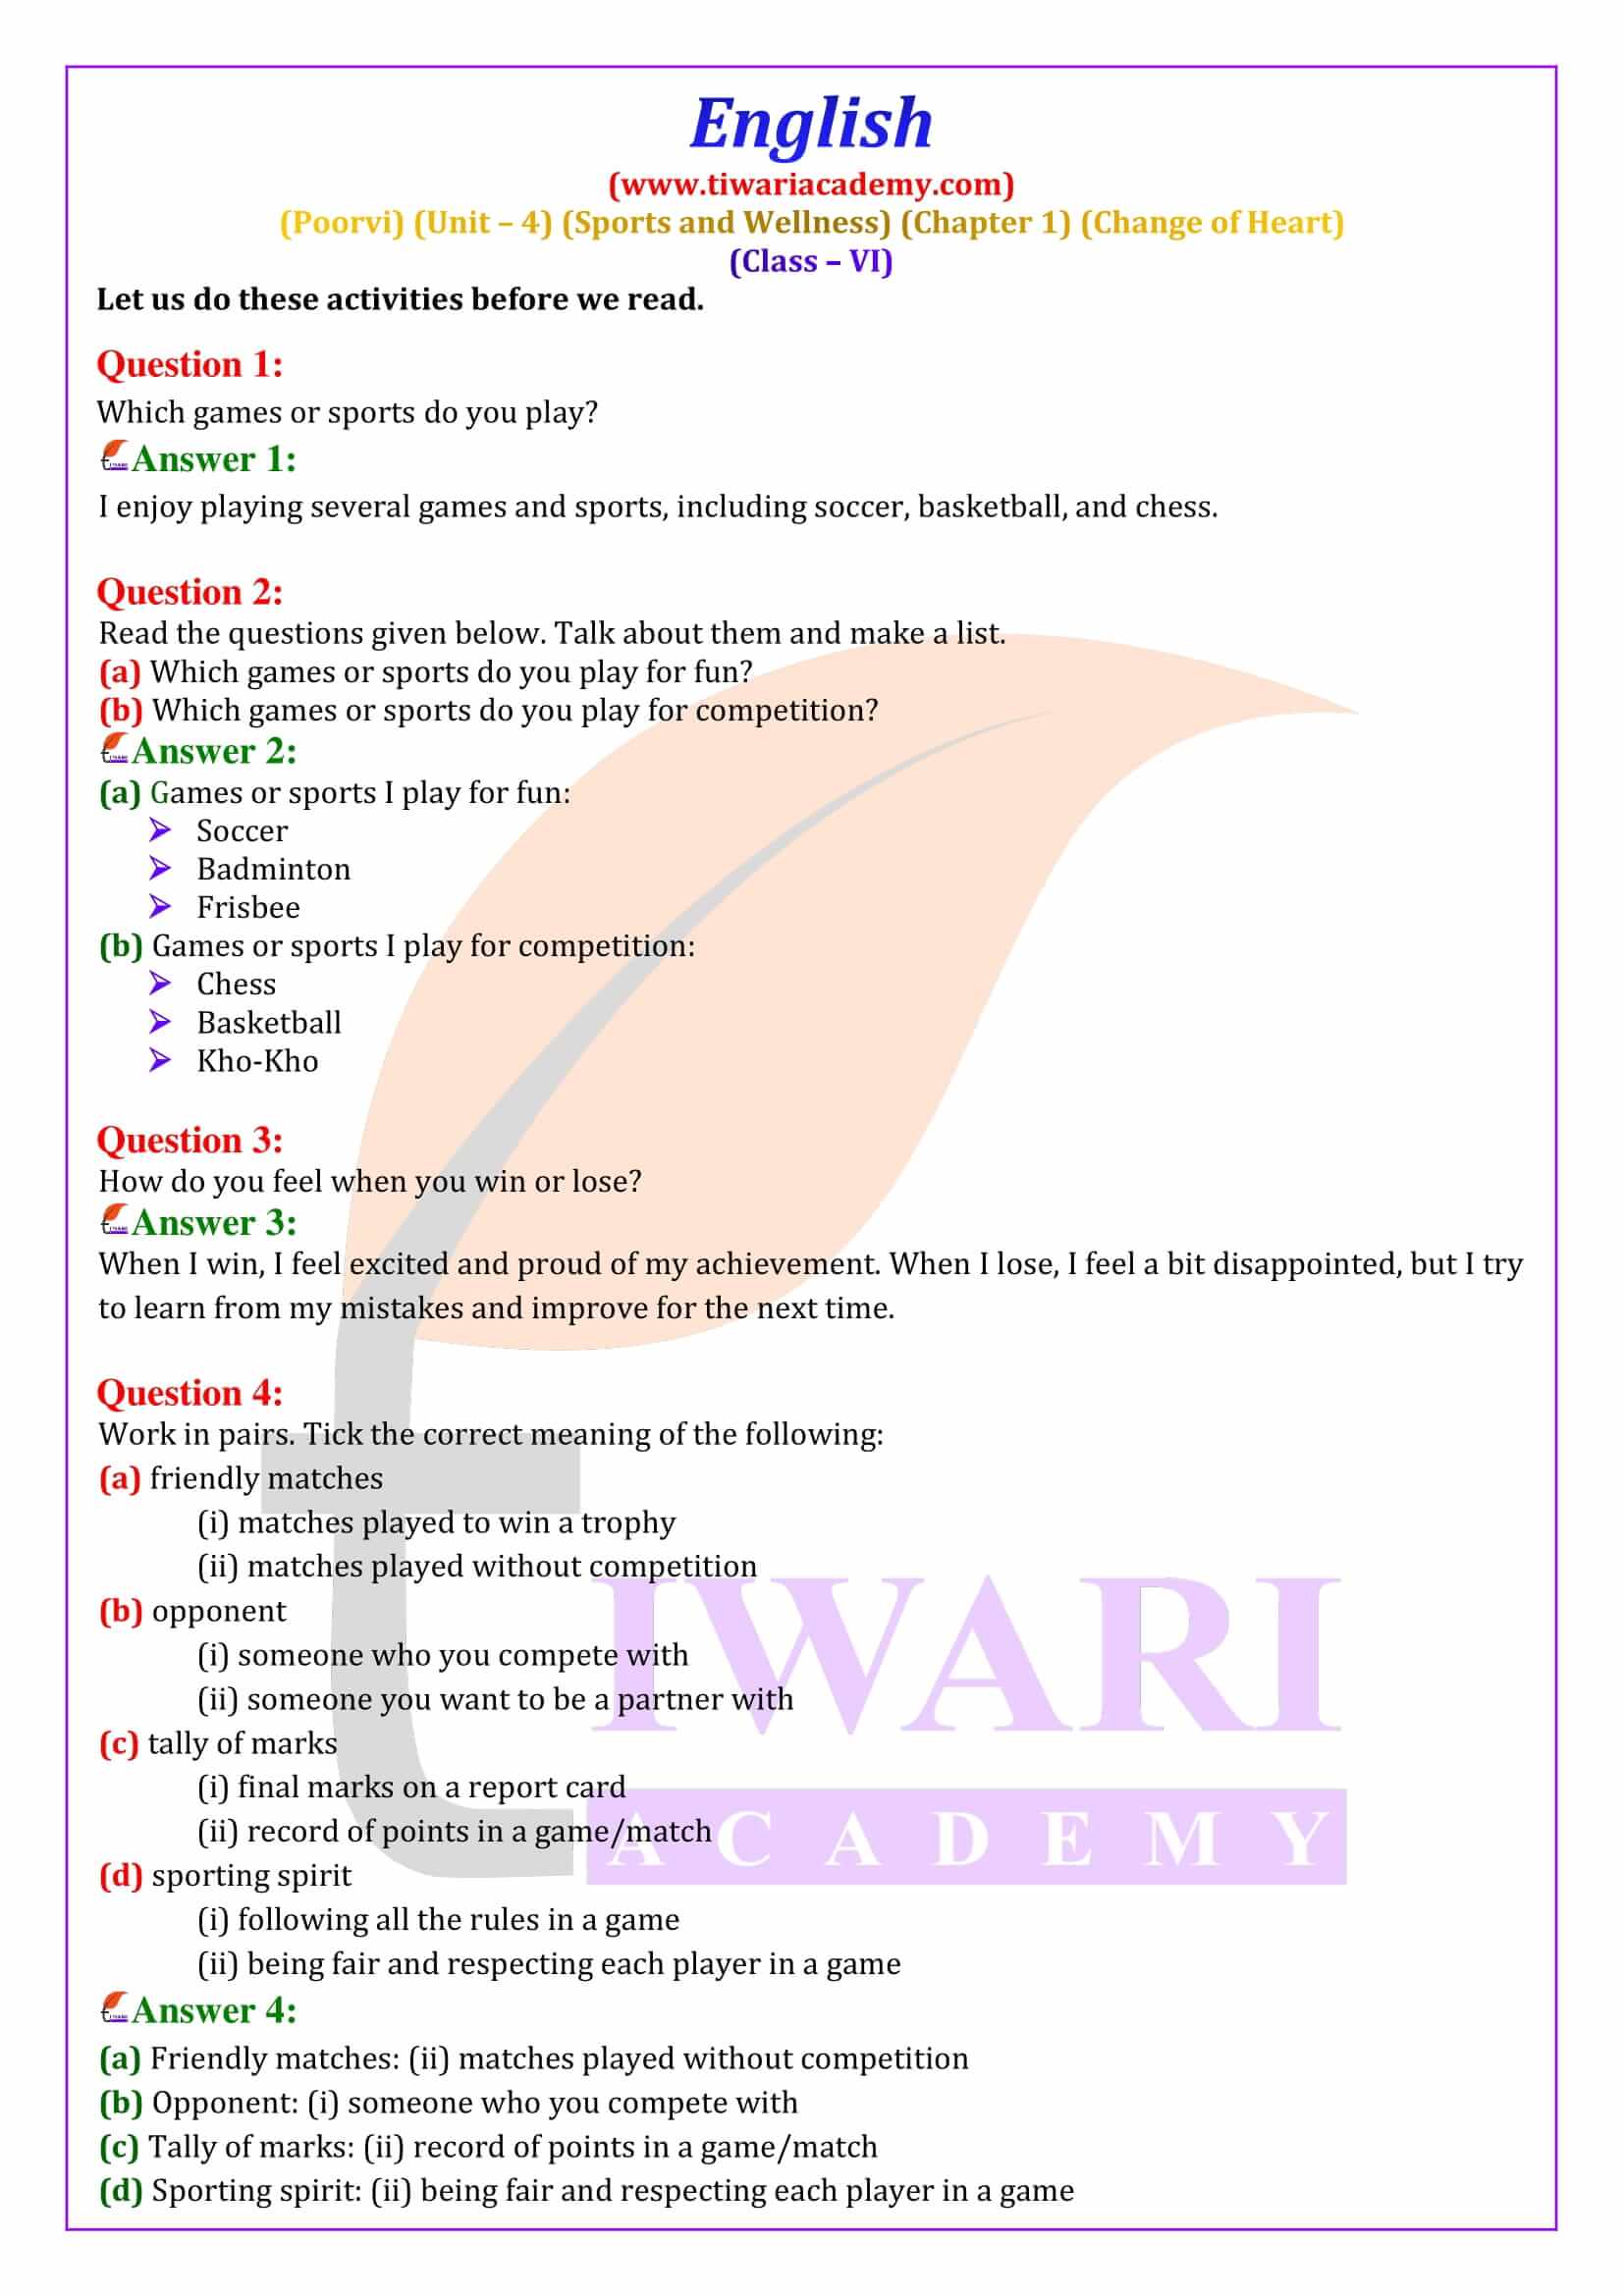 NCERT Solutions for Class 6 English Poorvi Unit 4 Sports and Wellness Chapter 1 Change of Heart